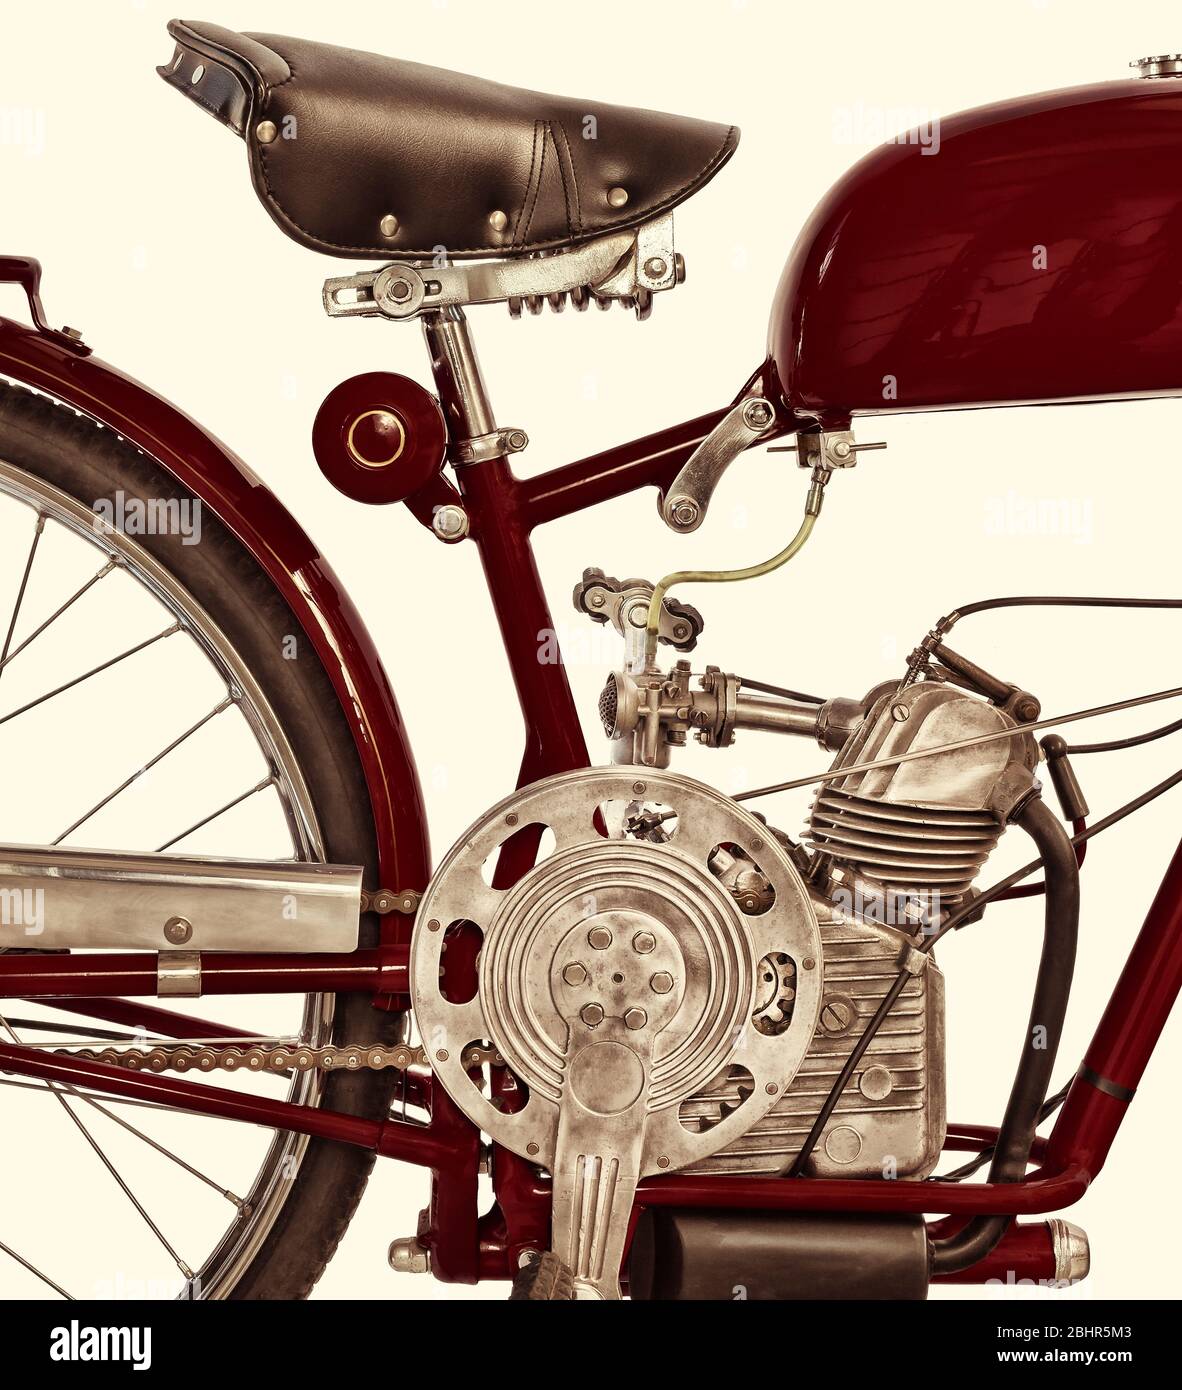 Retro styled side view of an ancient Italian red motorcycle Stock Photo